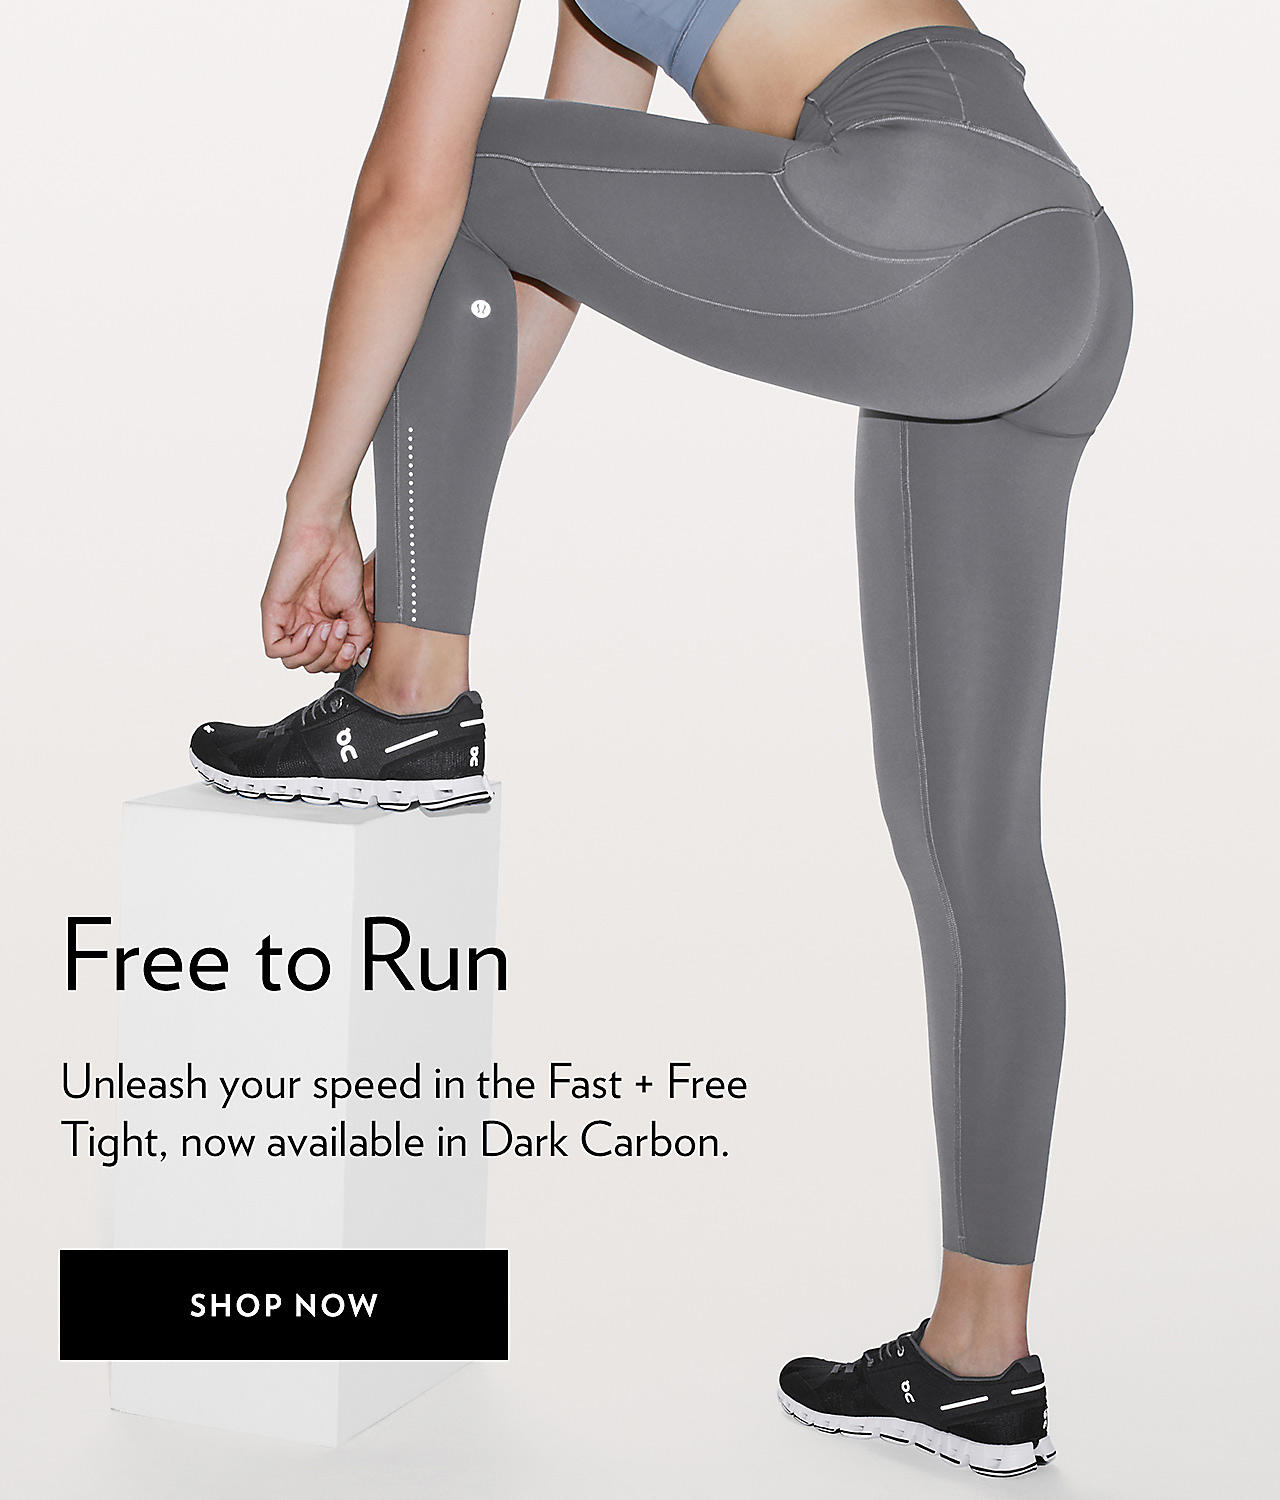 Free to Run - SHOP NOW